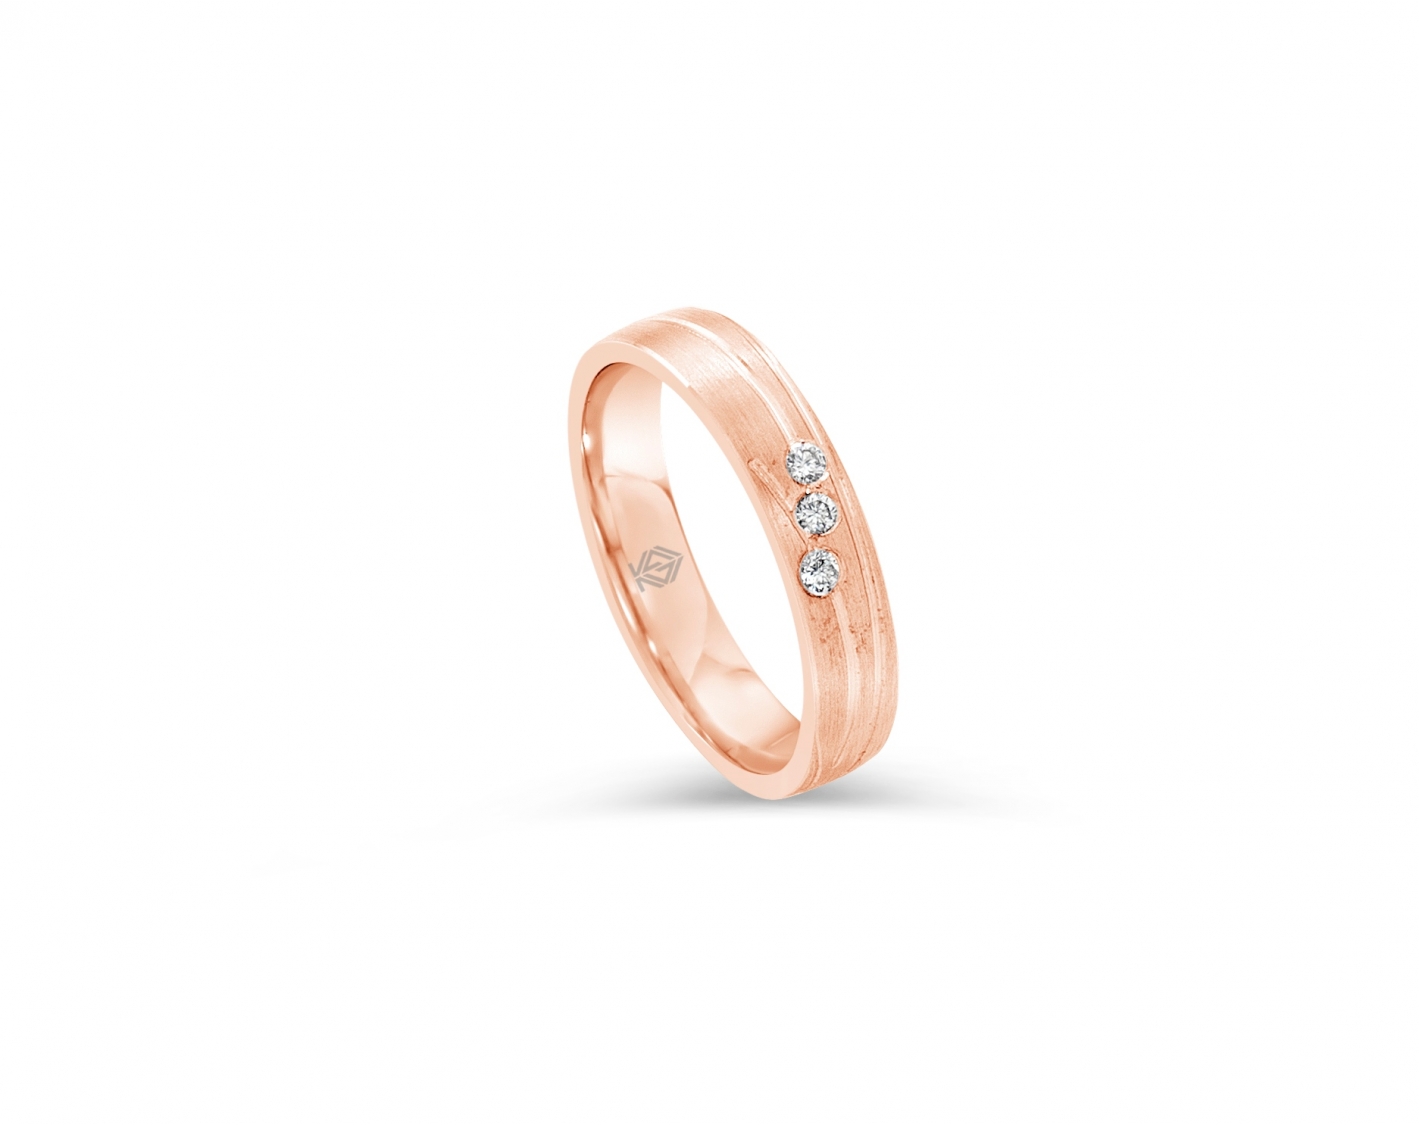 18k rose gold 4mm matte wedding ring set with three round diamonds and non-parallel inlays Photos & images